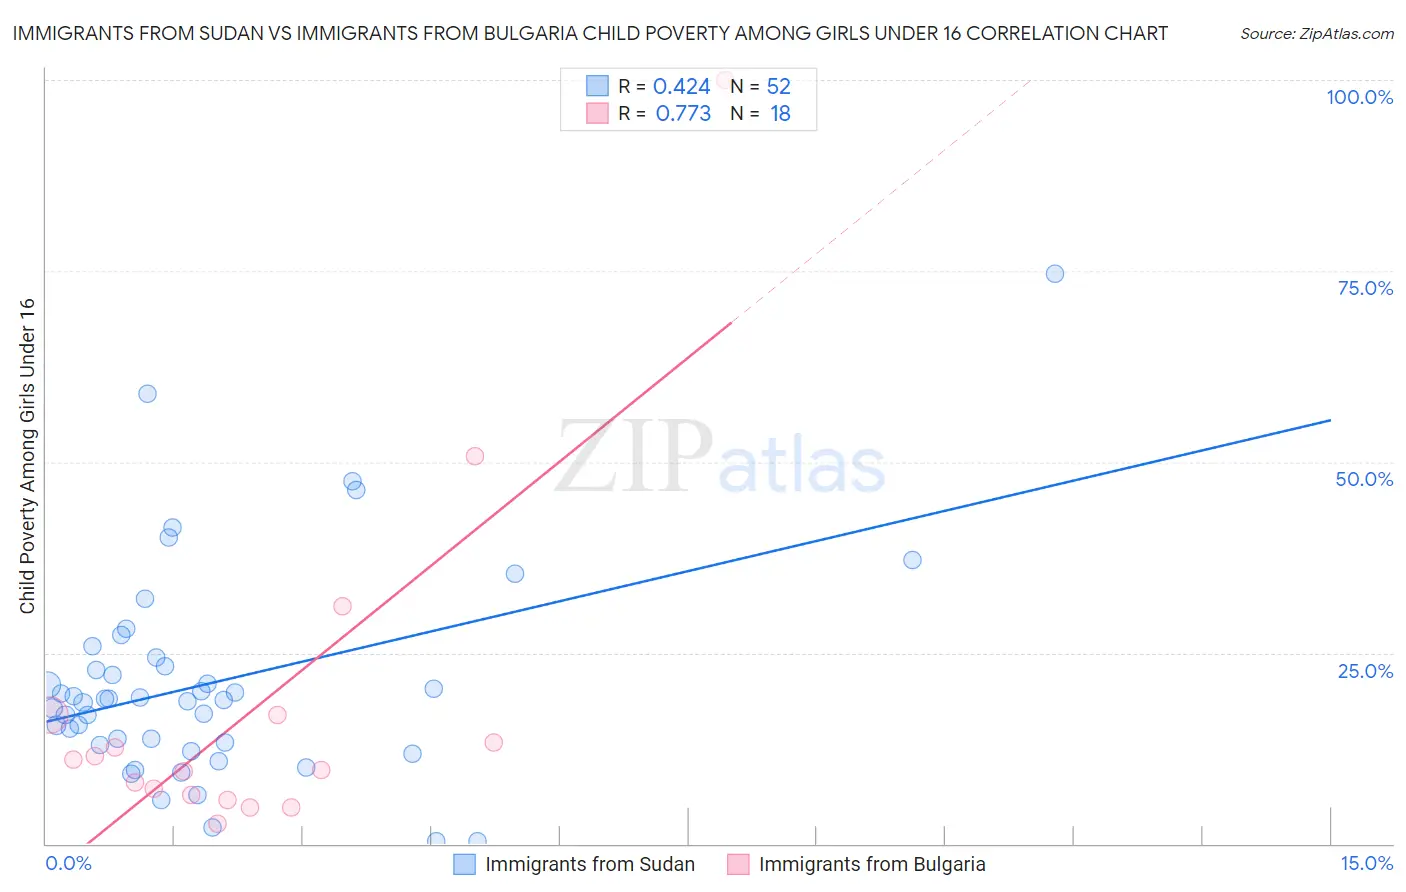 Immigrants from Sudan vs Immigrants from Bulgaria Child Poverty Among Girls Under 16